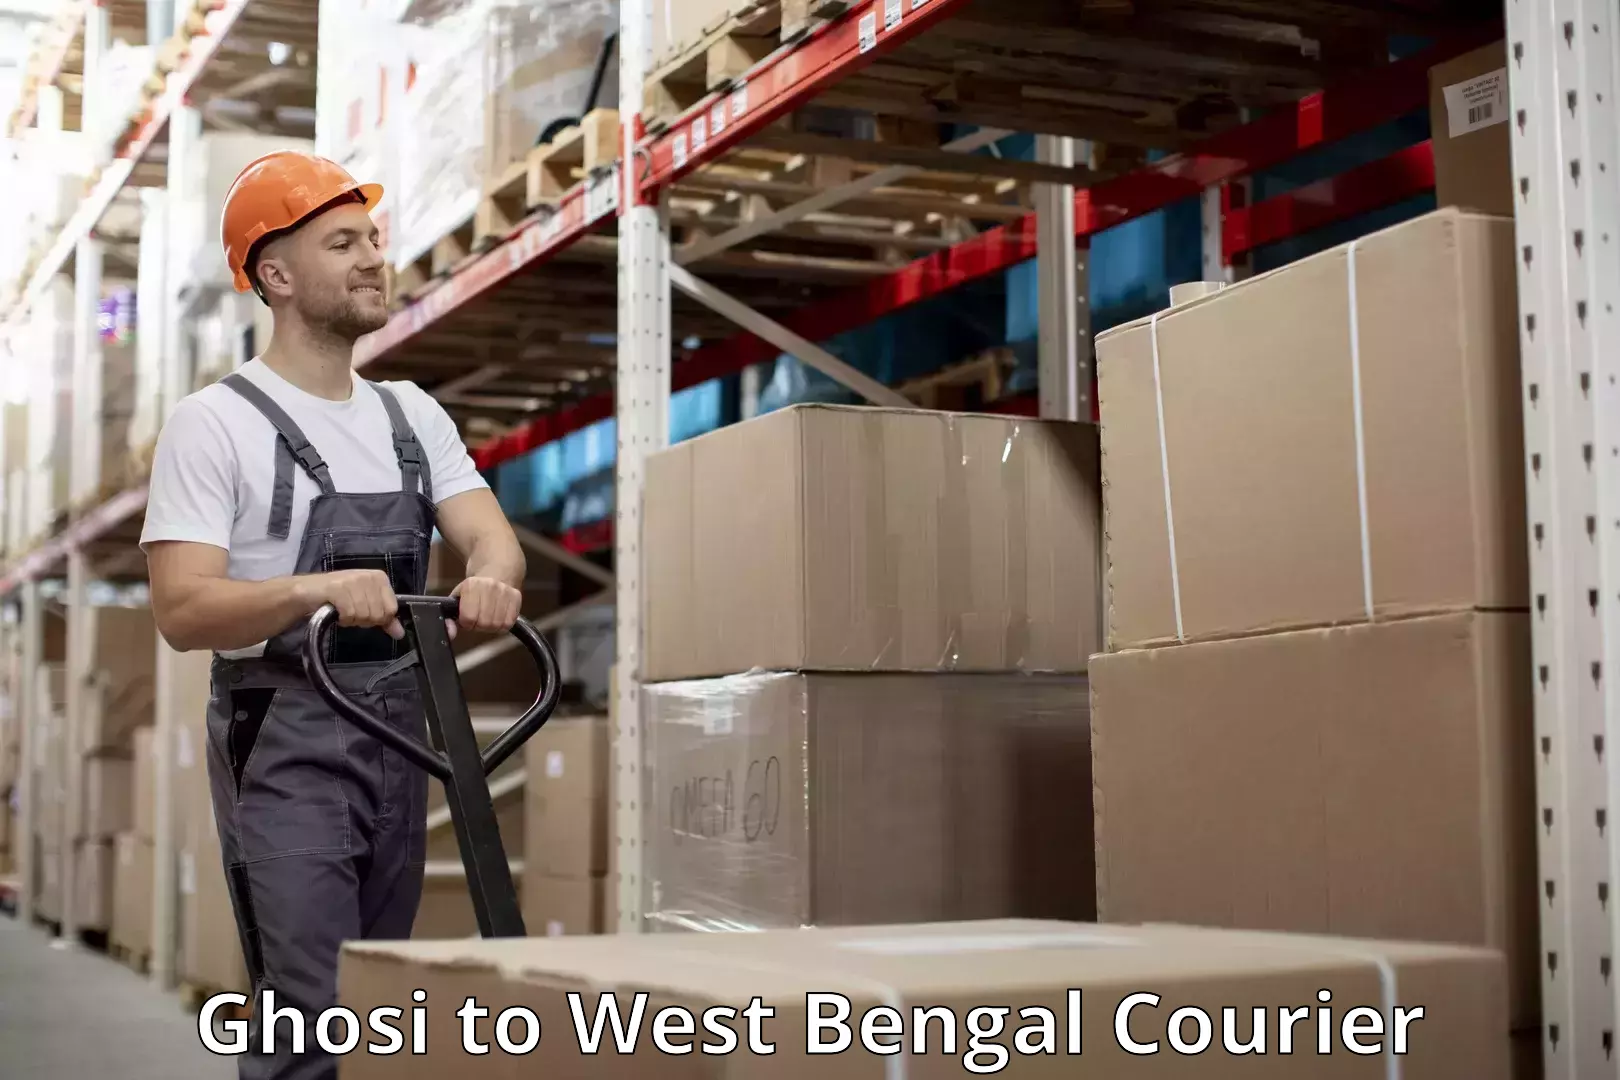 Luggage transport service Ghosi to West Bengal